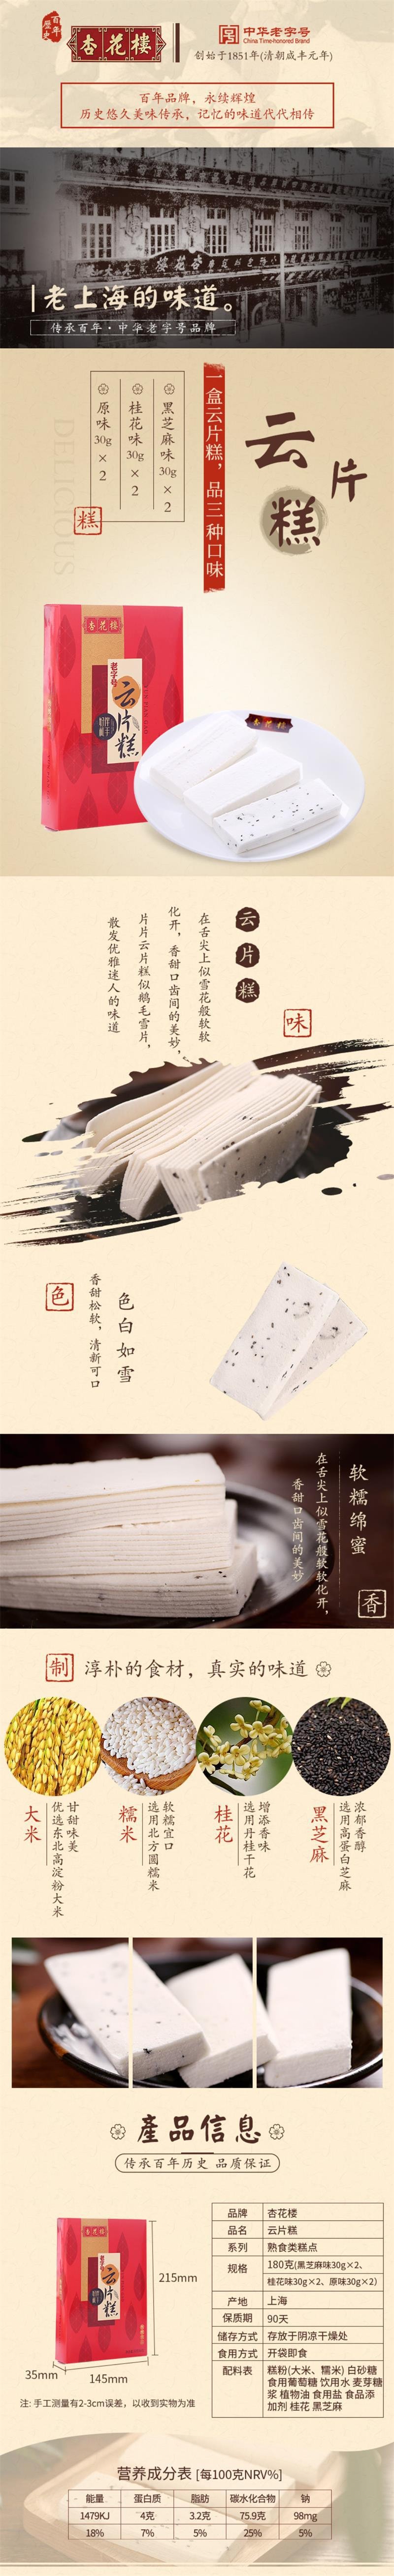 XINGHUALOU Old Font Cloud Cake   Shanghai sweet-scented osmanthus cake and black sesame cake180g